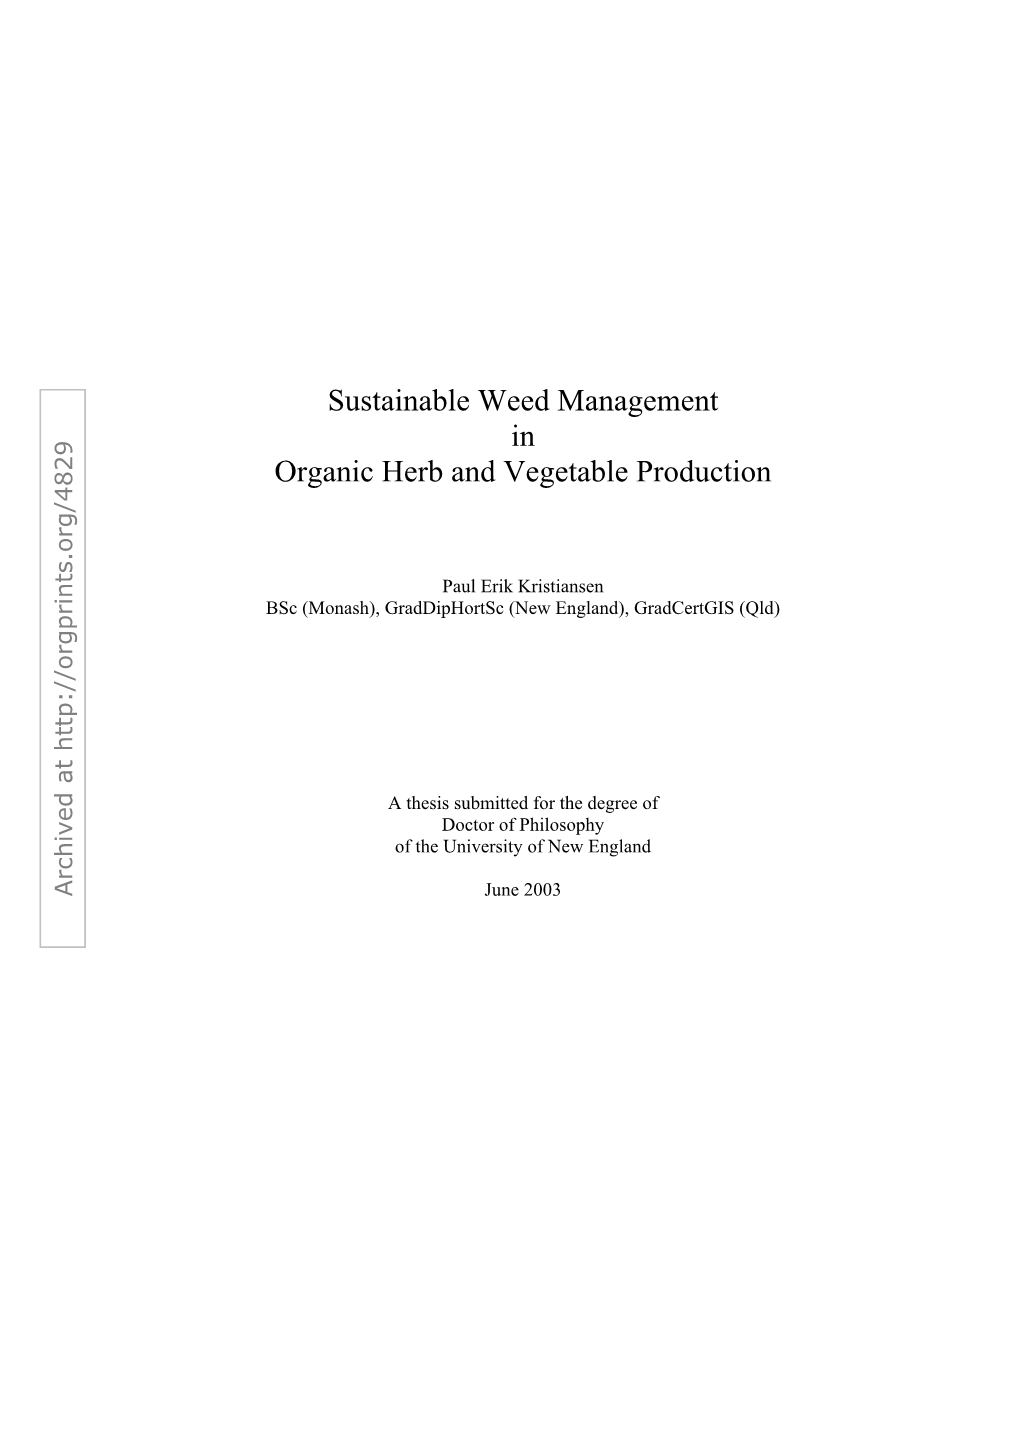 Sustainable Weed Management in Organic Herb and Vegetable Production